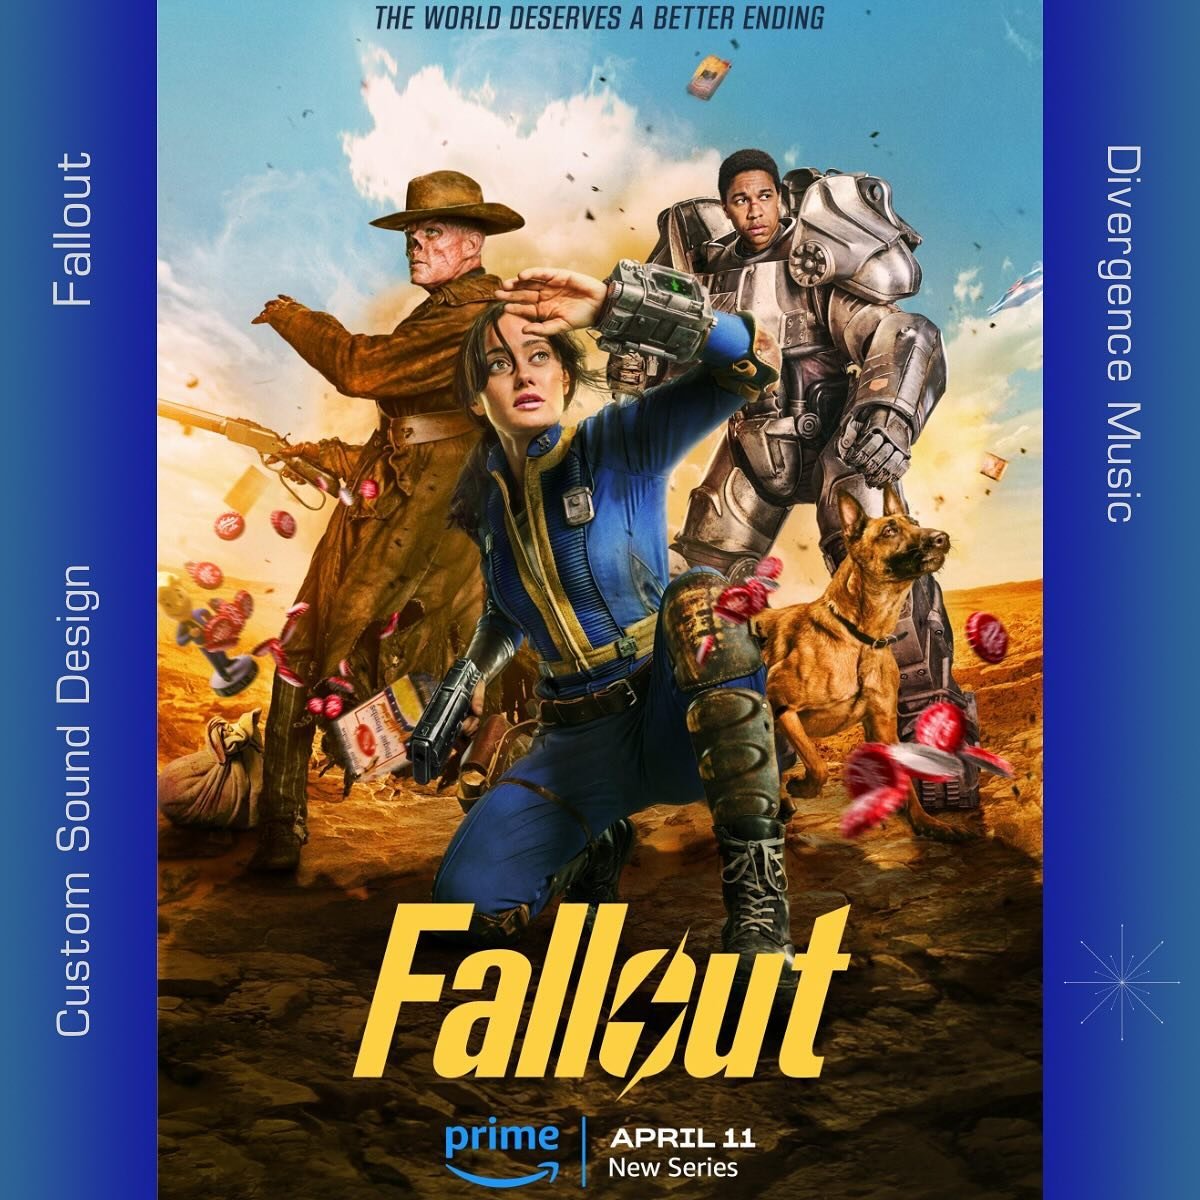 Can&rsquo;t wait to check out #fallout, releasing this Thursday! We had a great time doing custom sound design for the campaign.

Always a pleasure to work with @primevideo